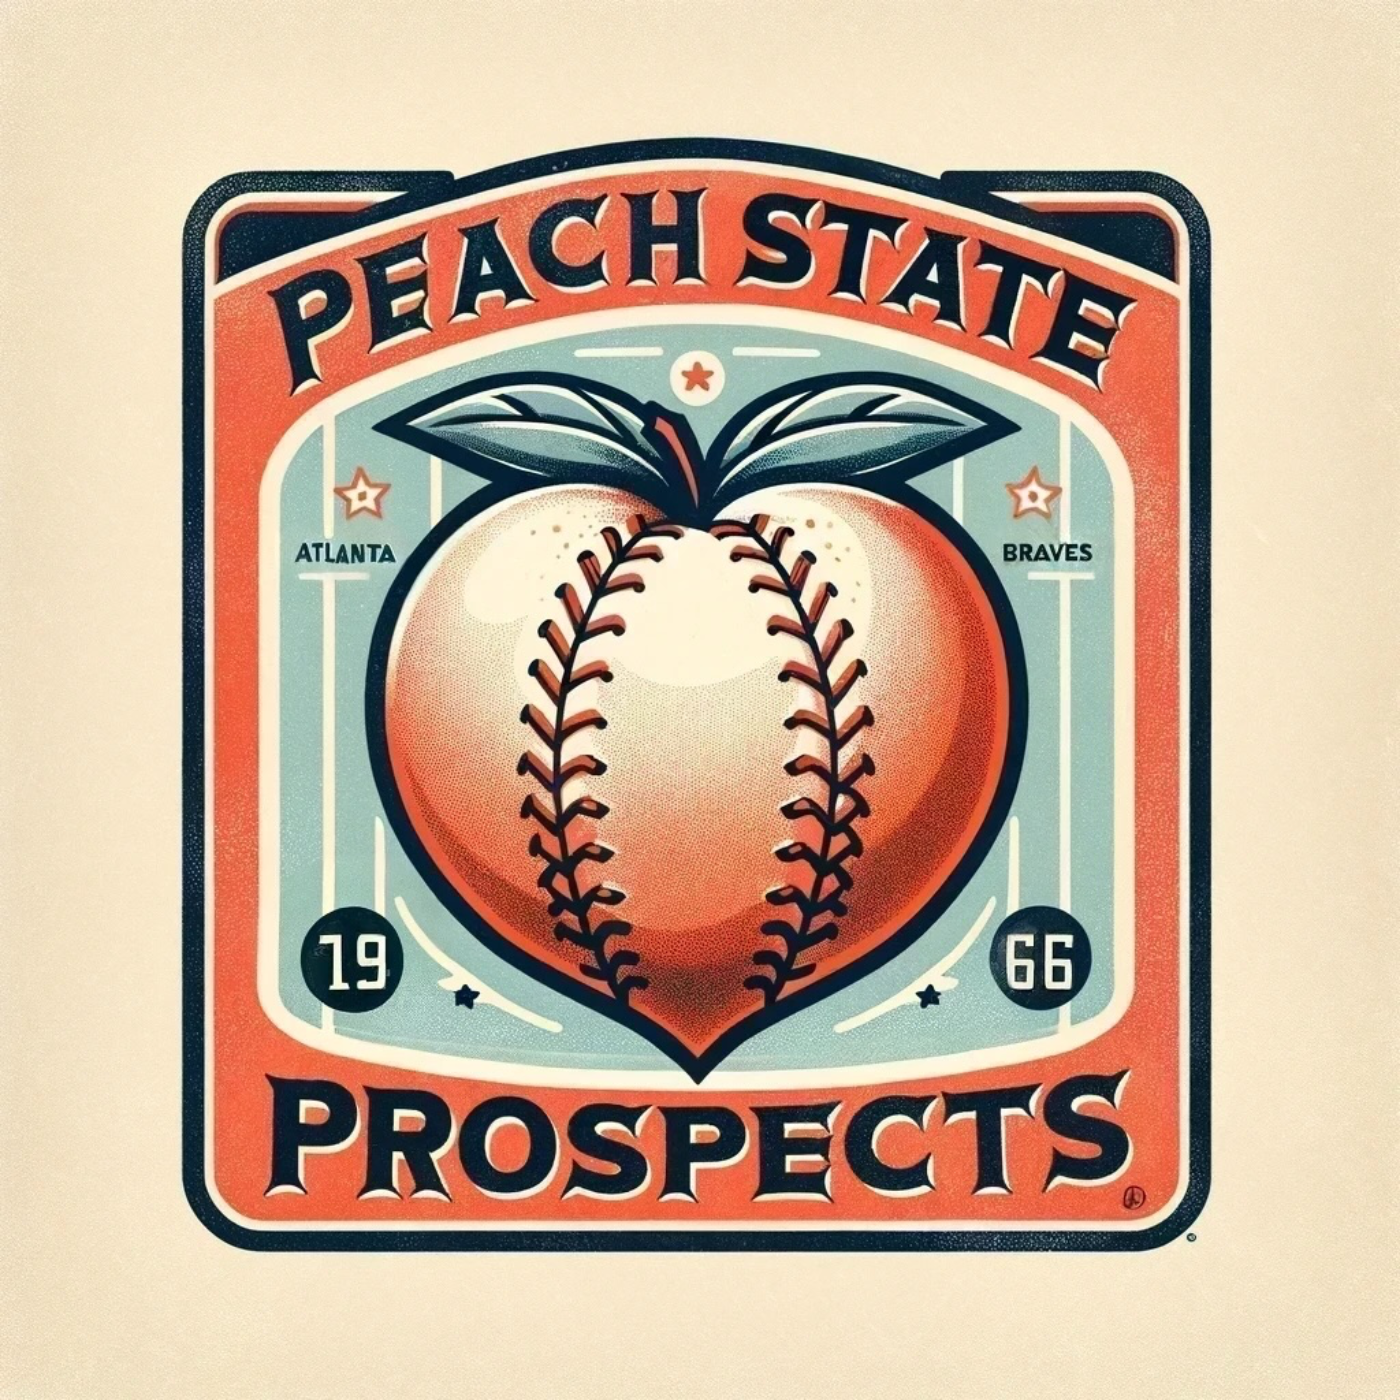 Peach State Prospects